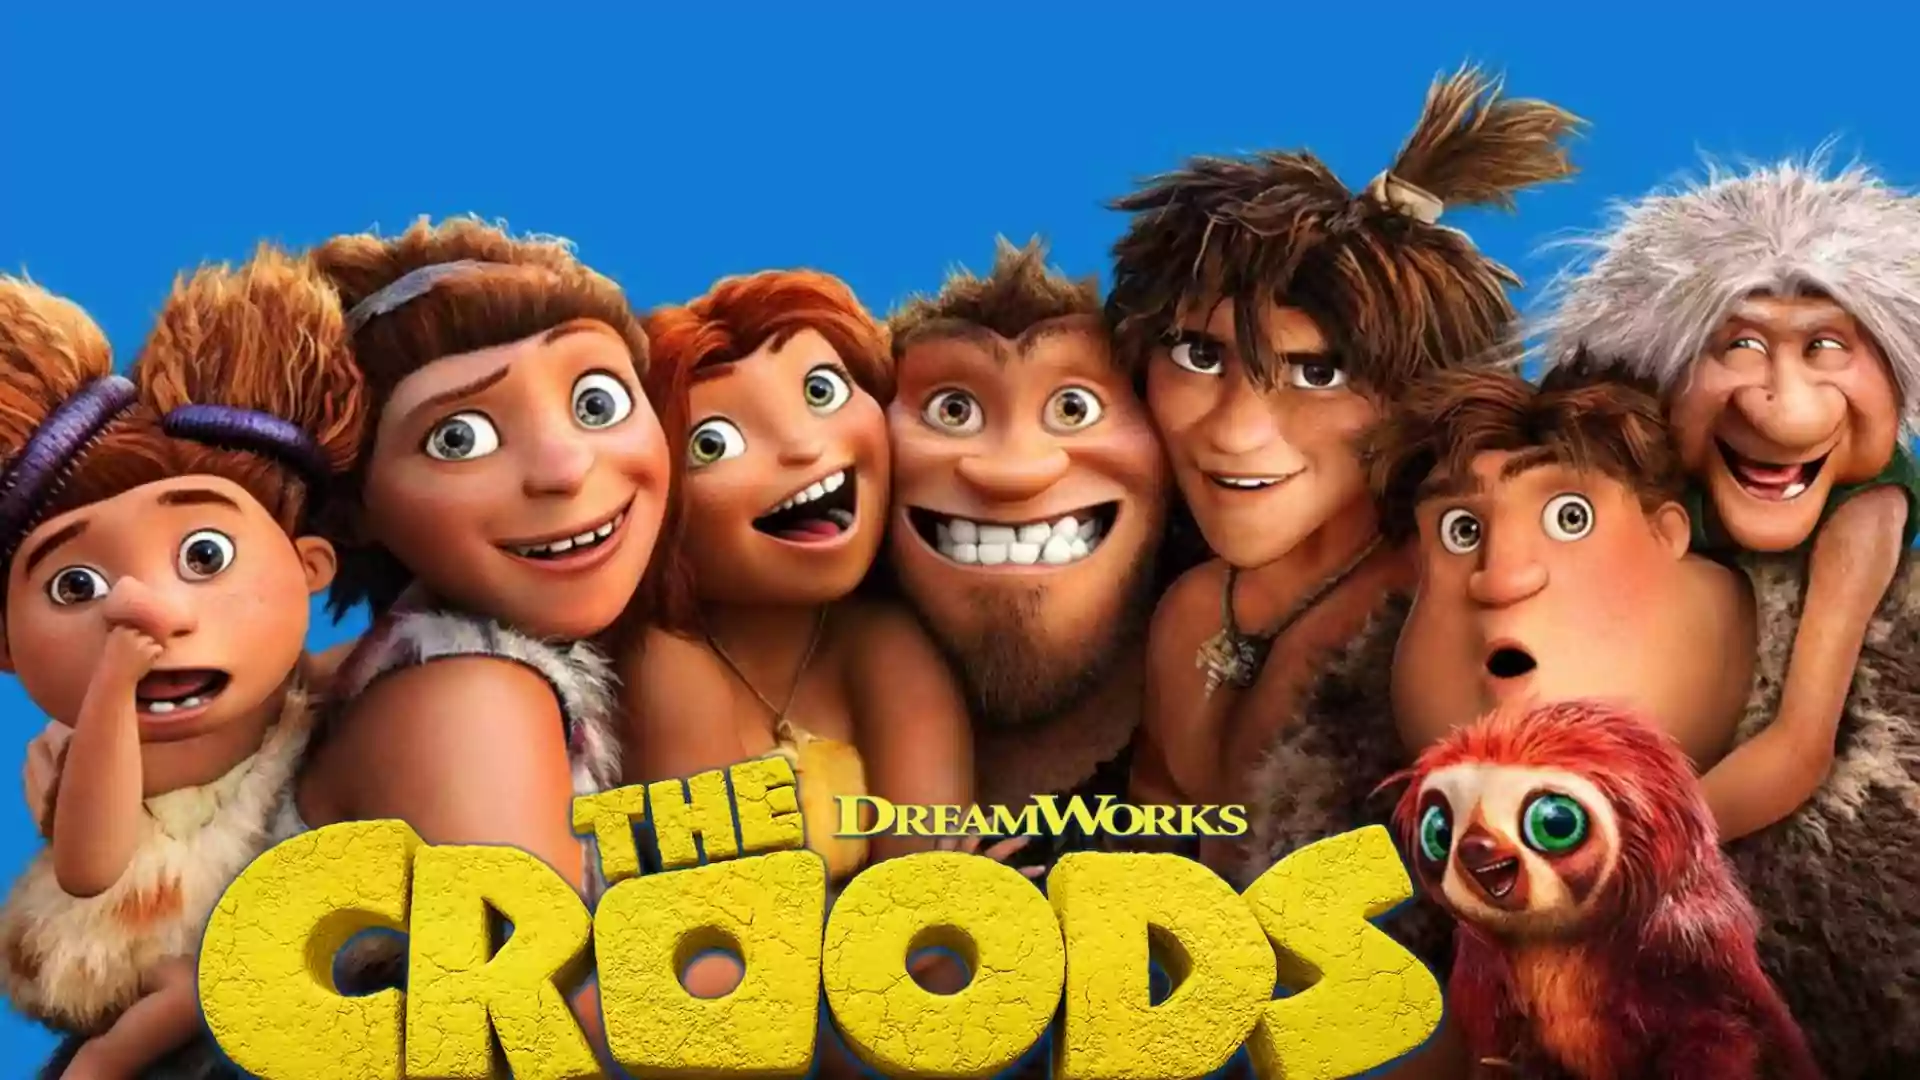 The Croods Parents Guide | The Croods Age Rating | 2013